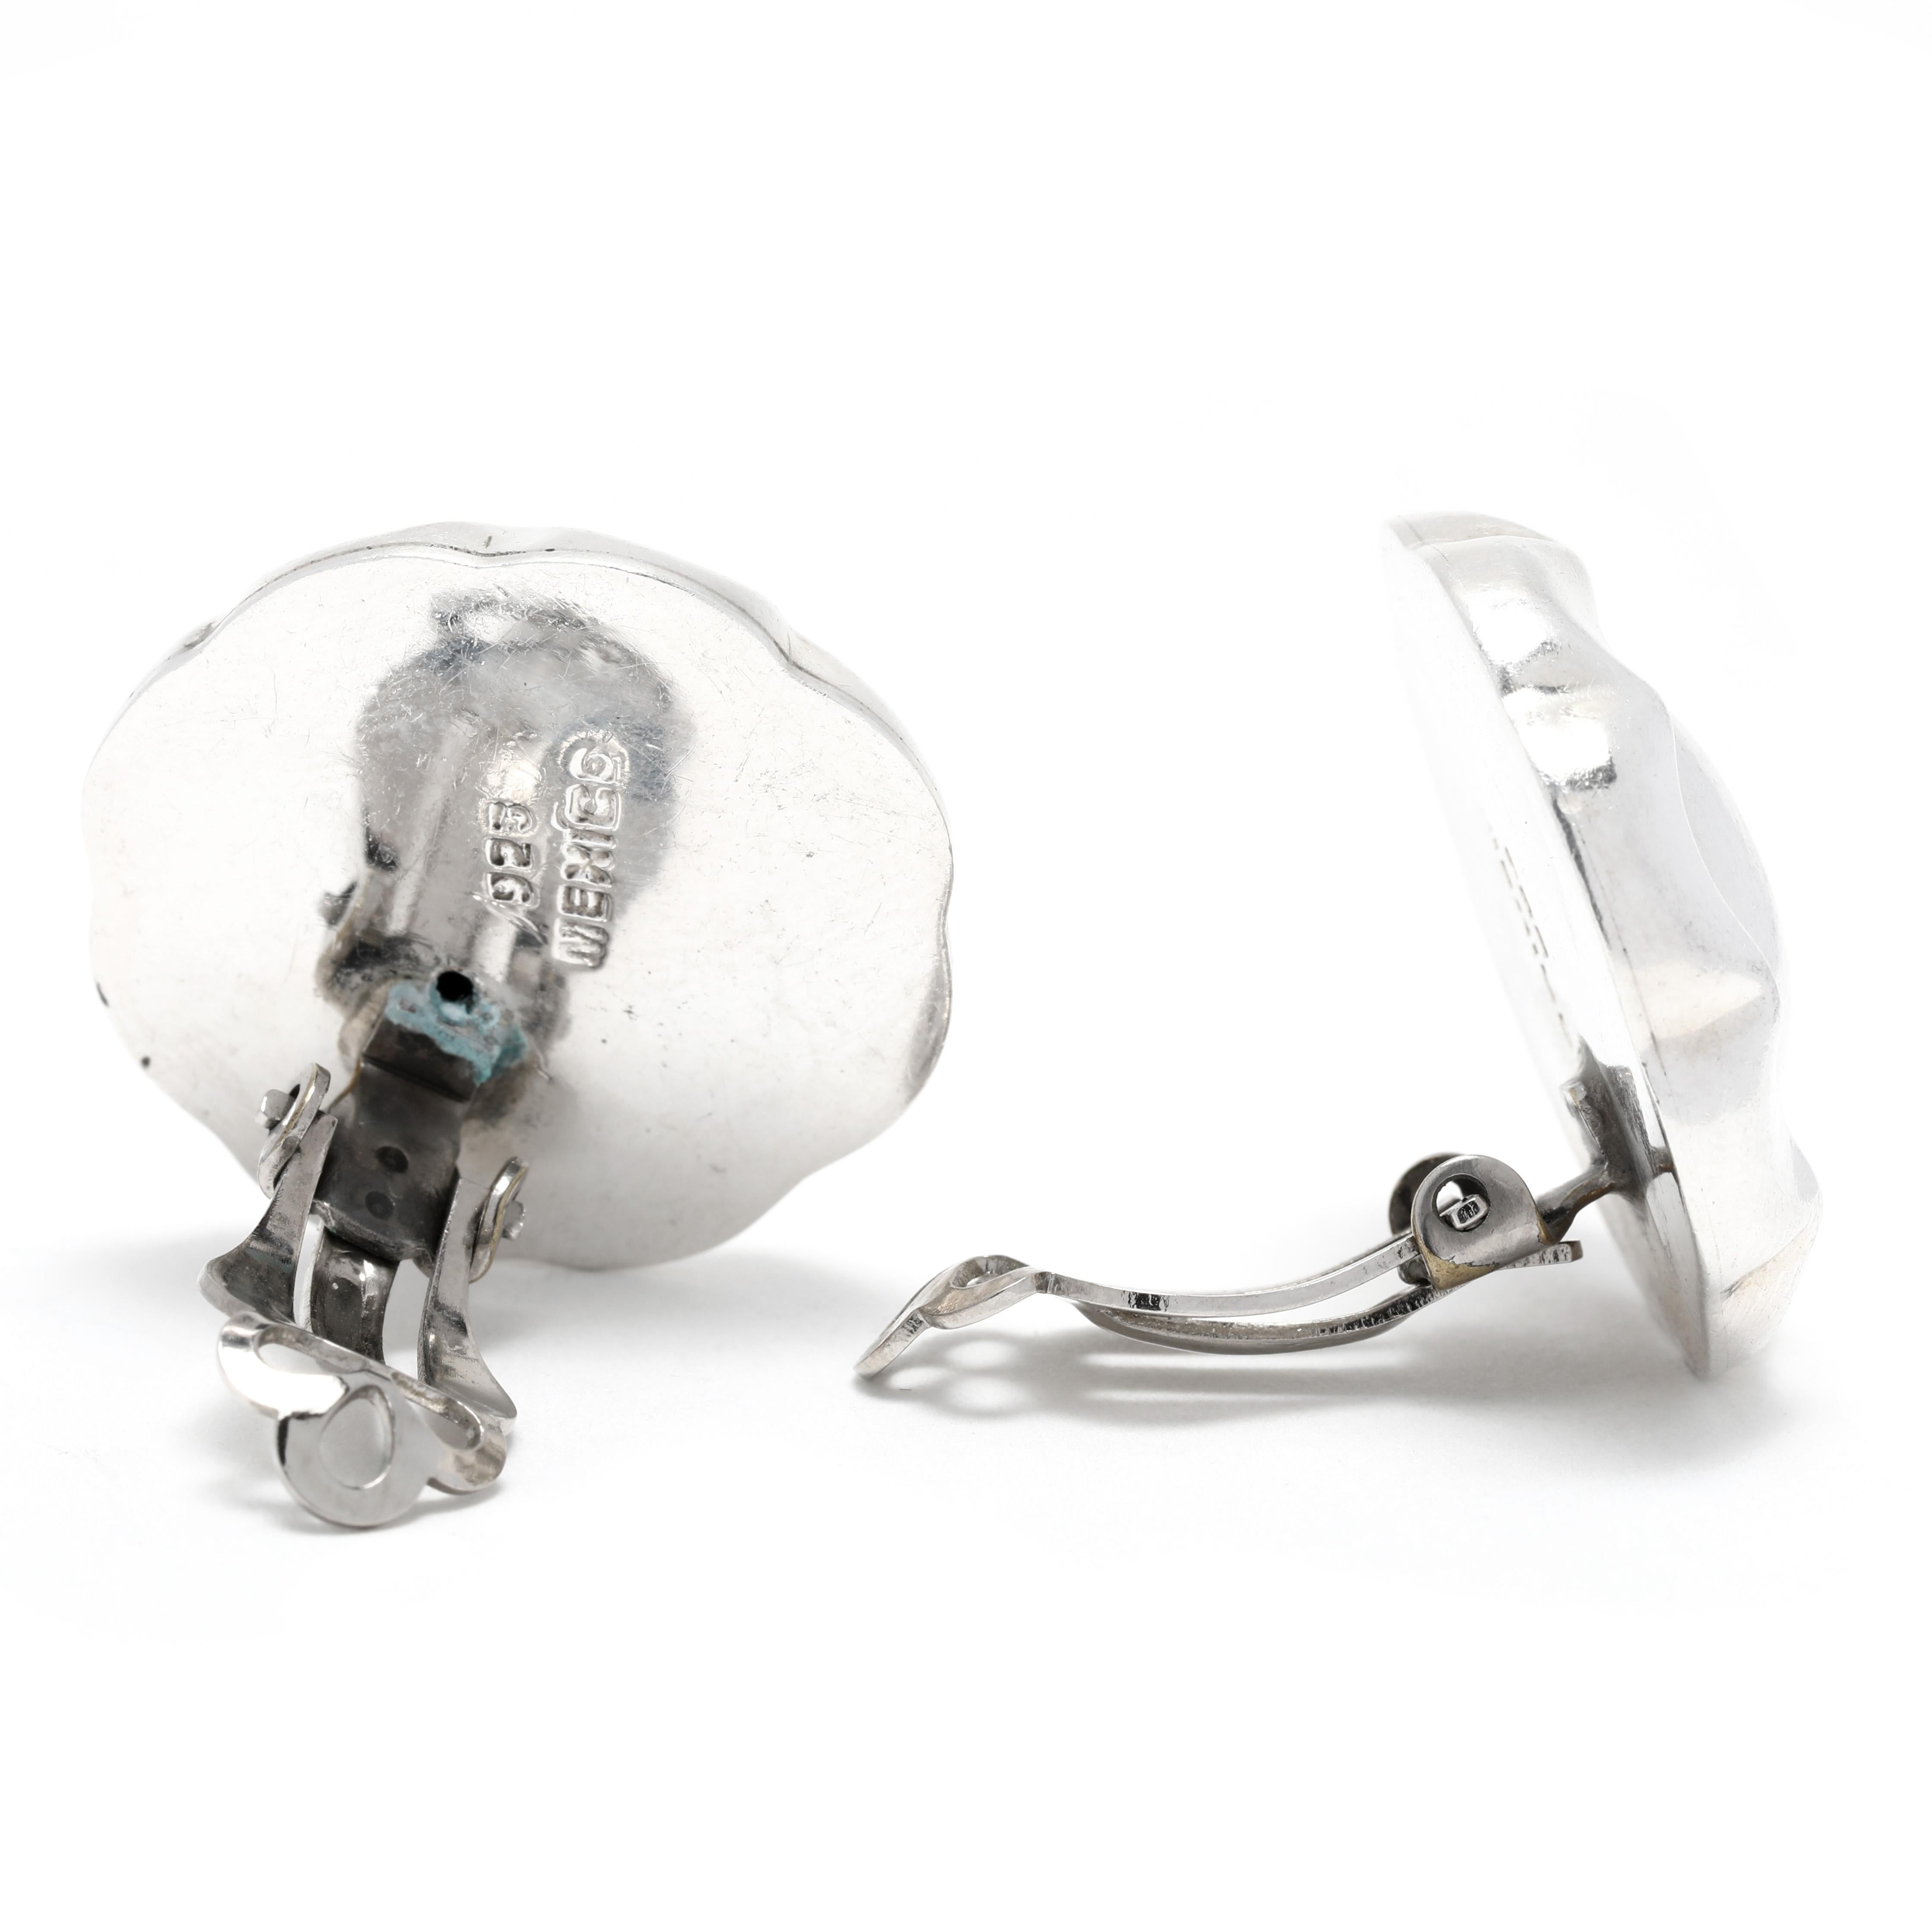 These beautiful Large Mexican Dome Clip On Earrings are handcrafted from sterling silver and measure 1 inch in length. Whether you're going to work or out for a night on the town, these silver clip ons are the perfect accessory to add a touch of